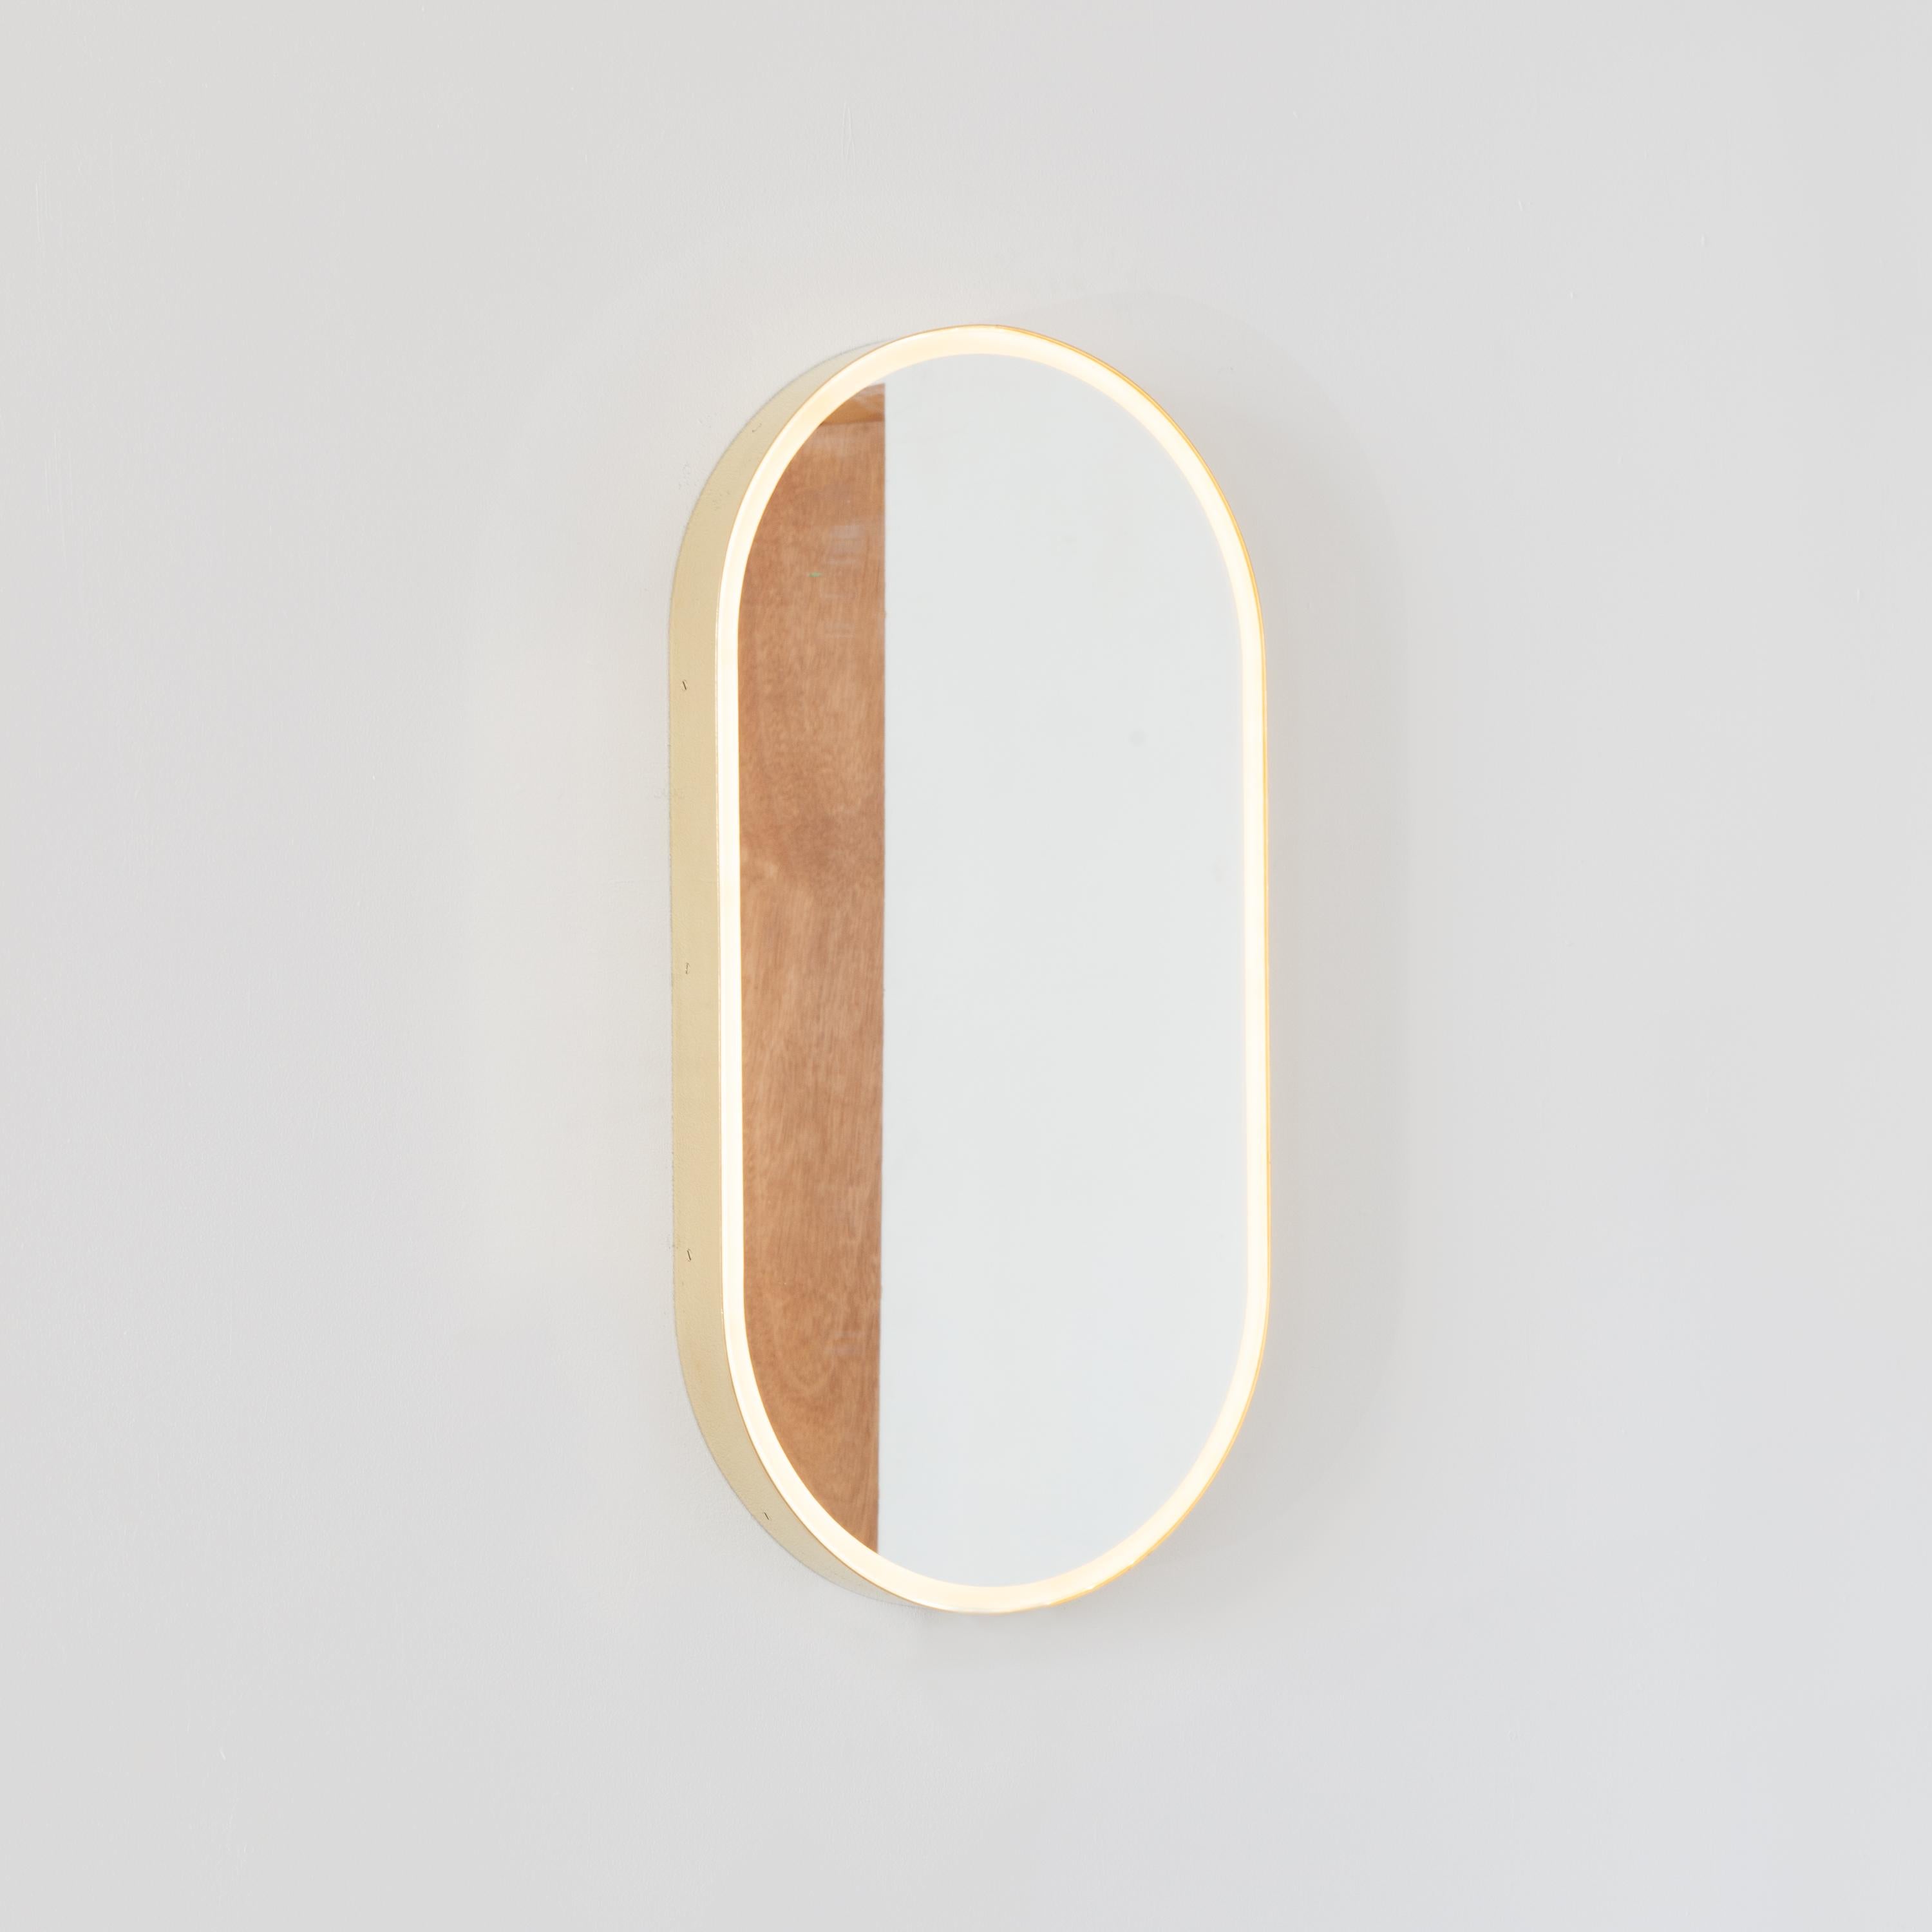 Capsula Illuminated Customisable Contemporary Mirror with Brass Frame, Small For Sale 1